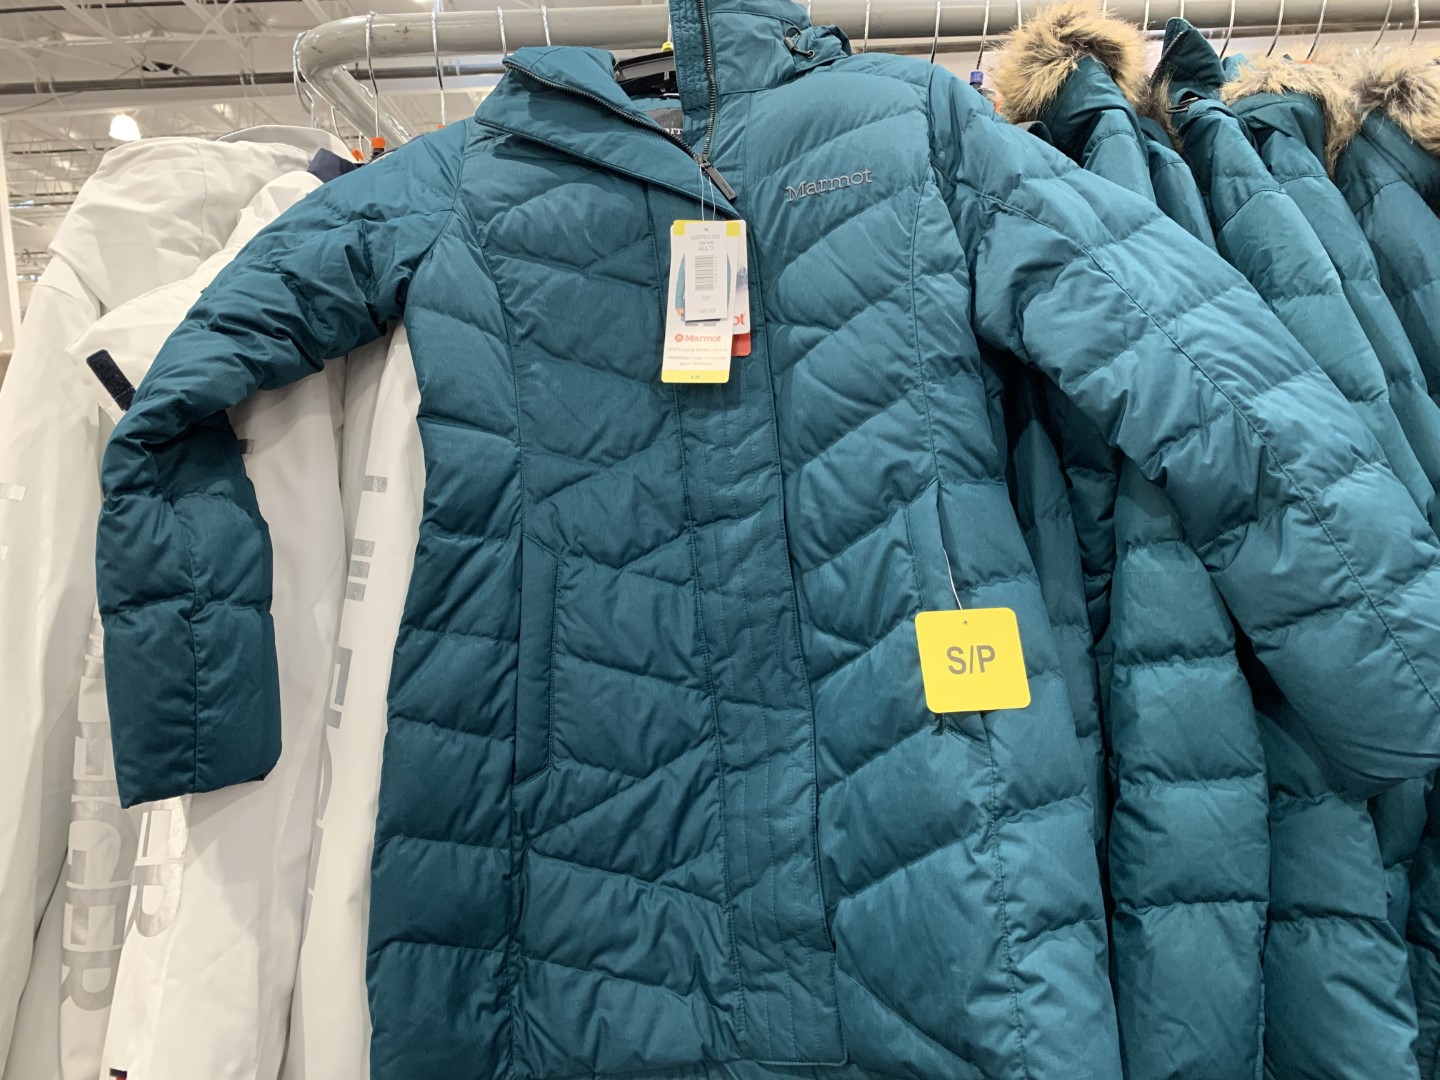 Costco Fall Clothing 2019 Superpost! Clothing & Jackets Costco West